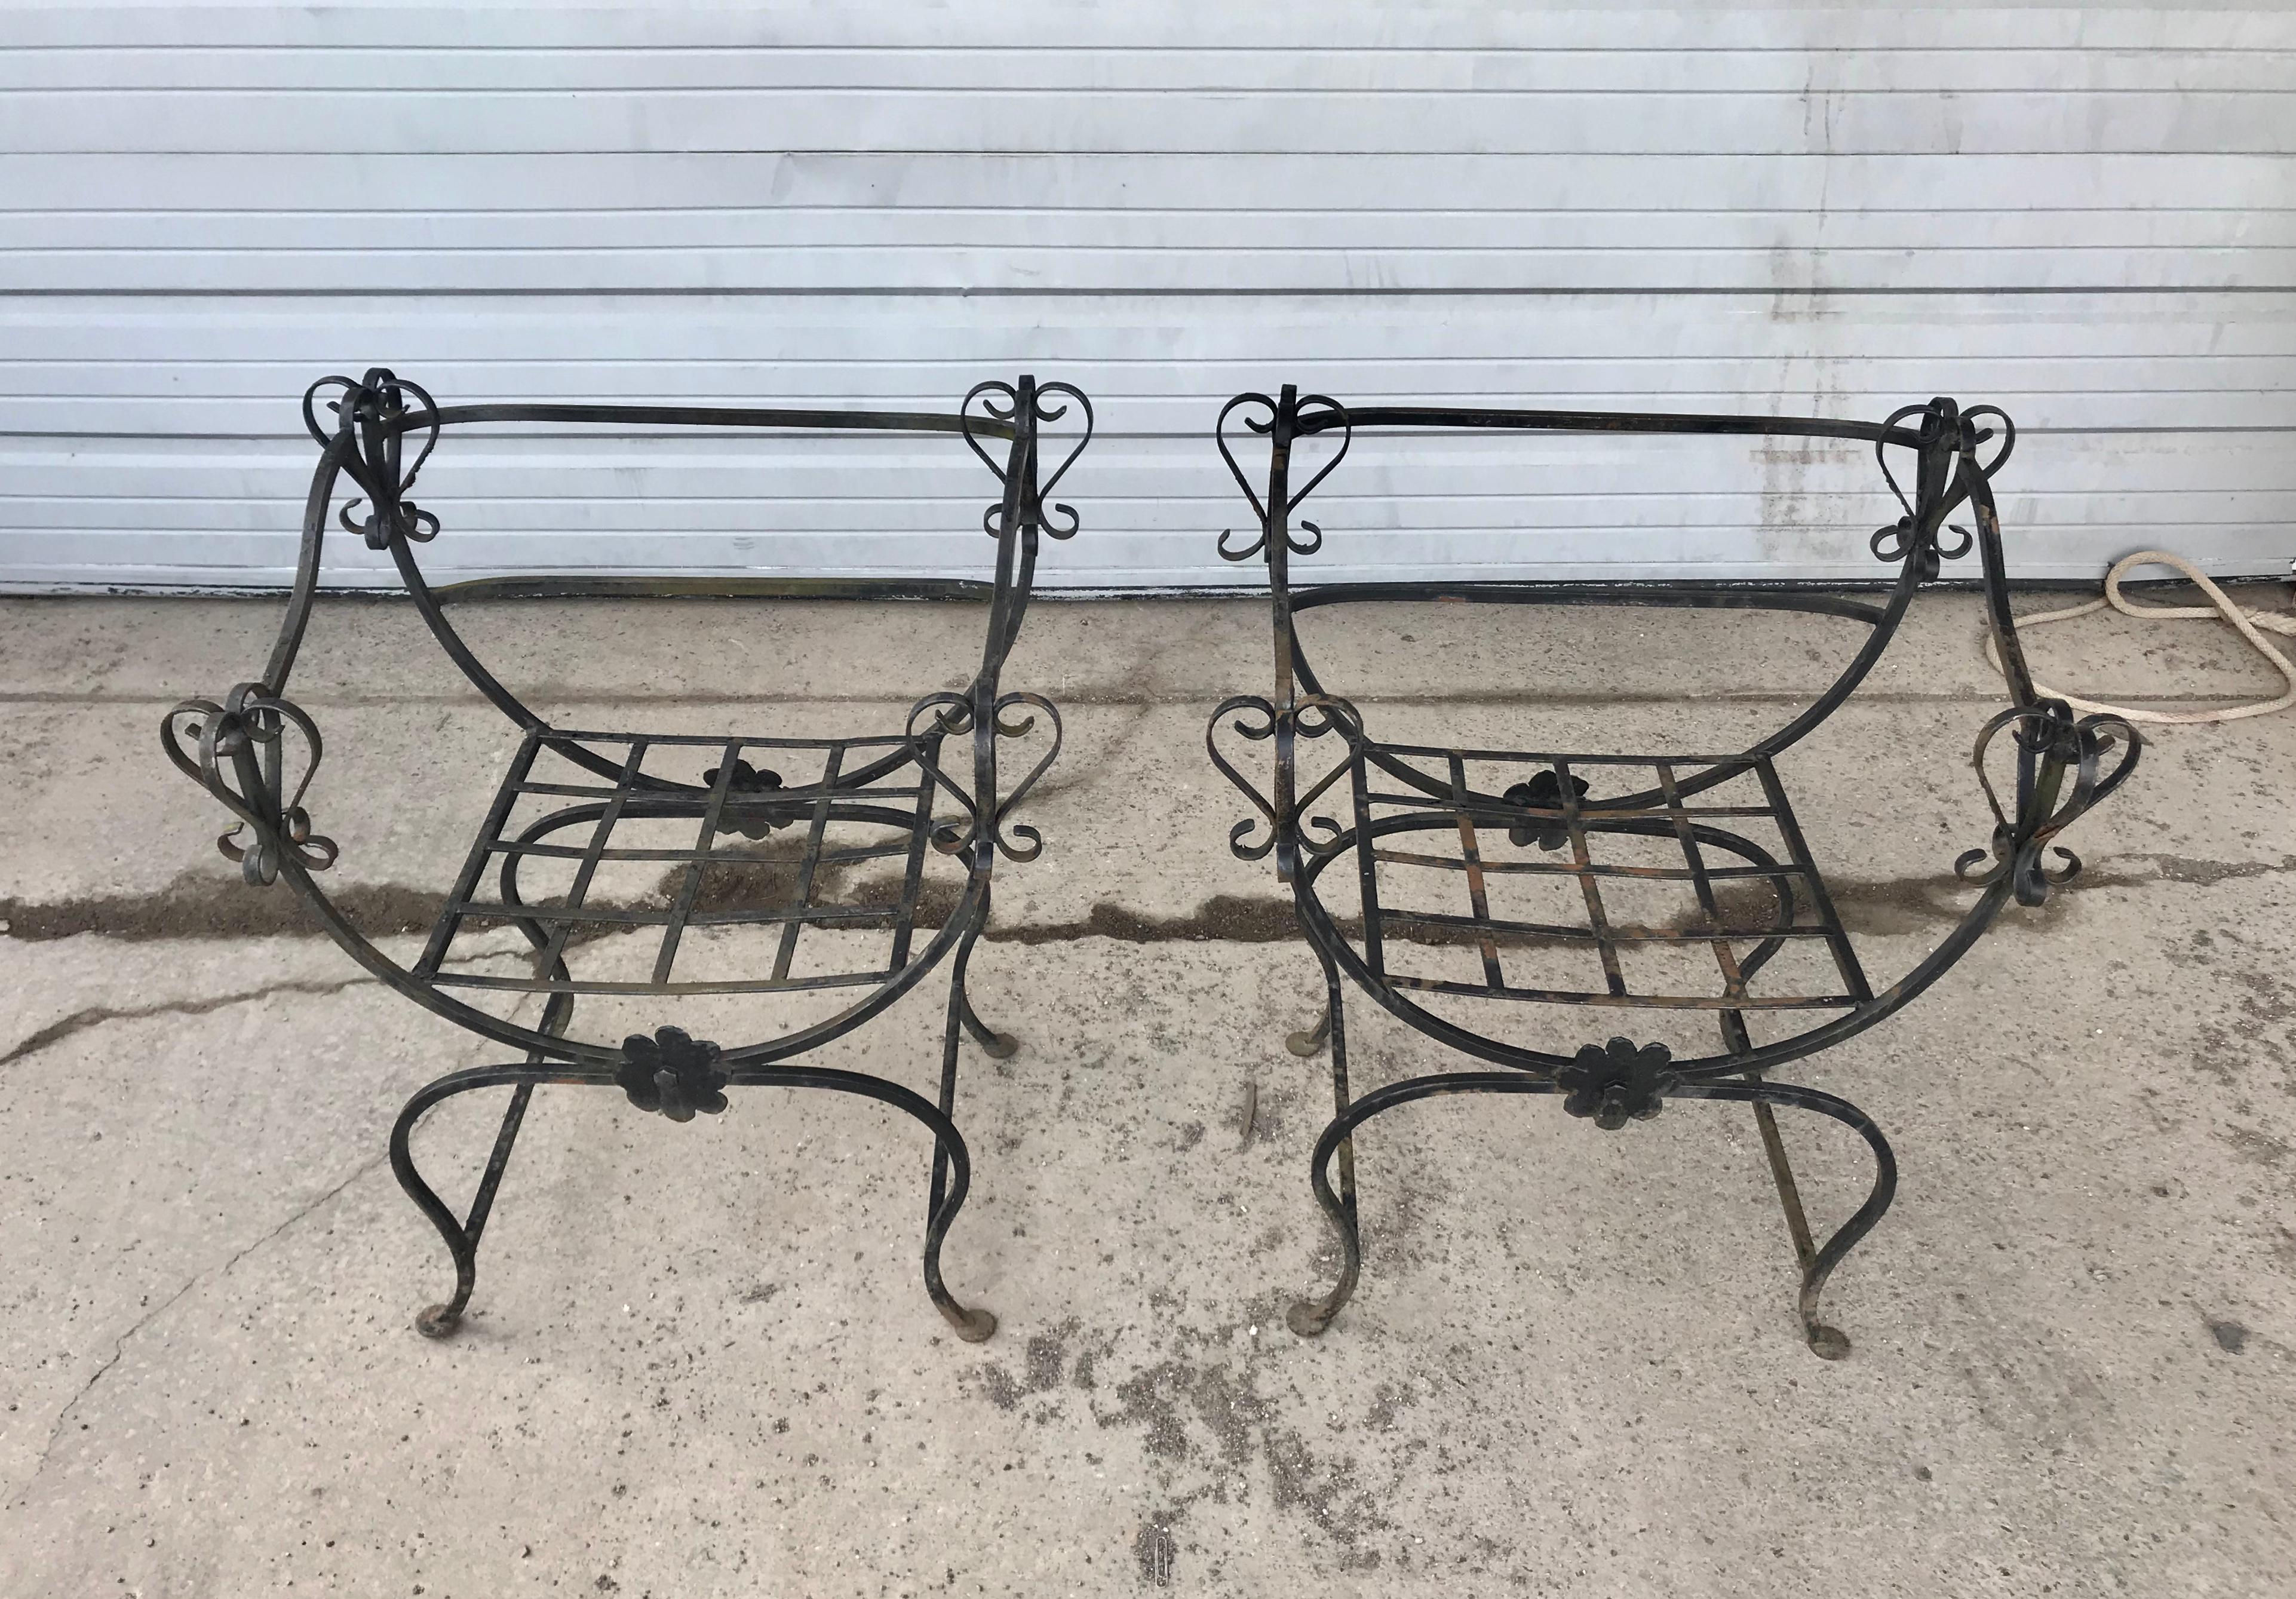 Unusual Pair Iron Chairs ,custom made .Savonarola Style.indoor /outdoor.,custom made c.1950s. Savonarola Style.indoor /outdoor,, Matching chaise lounge  available ..Please check other listings,, Hand delivery avail to New York City or anywhere en